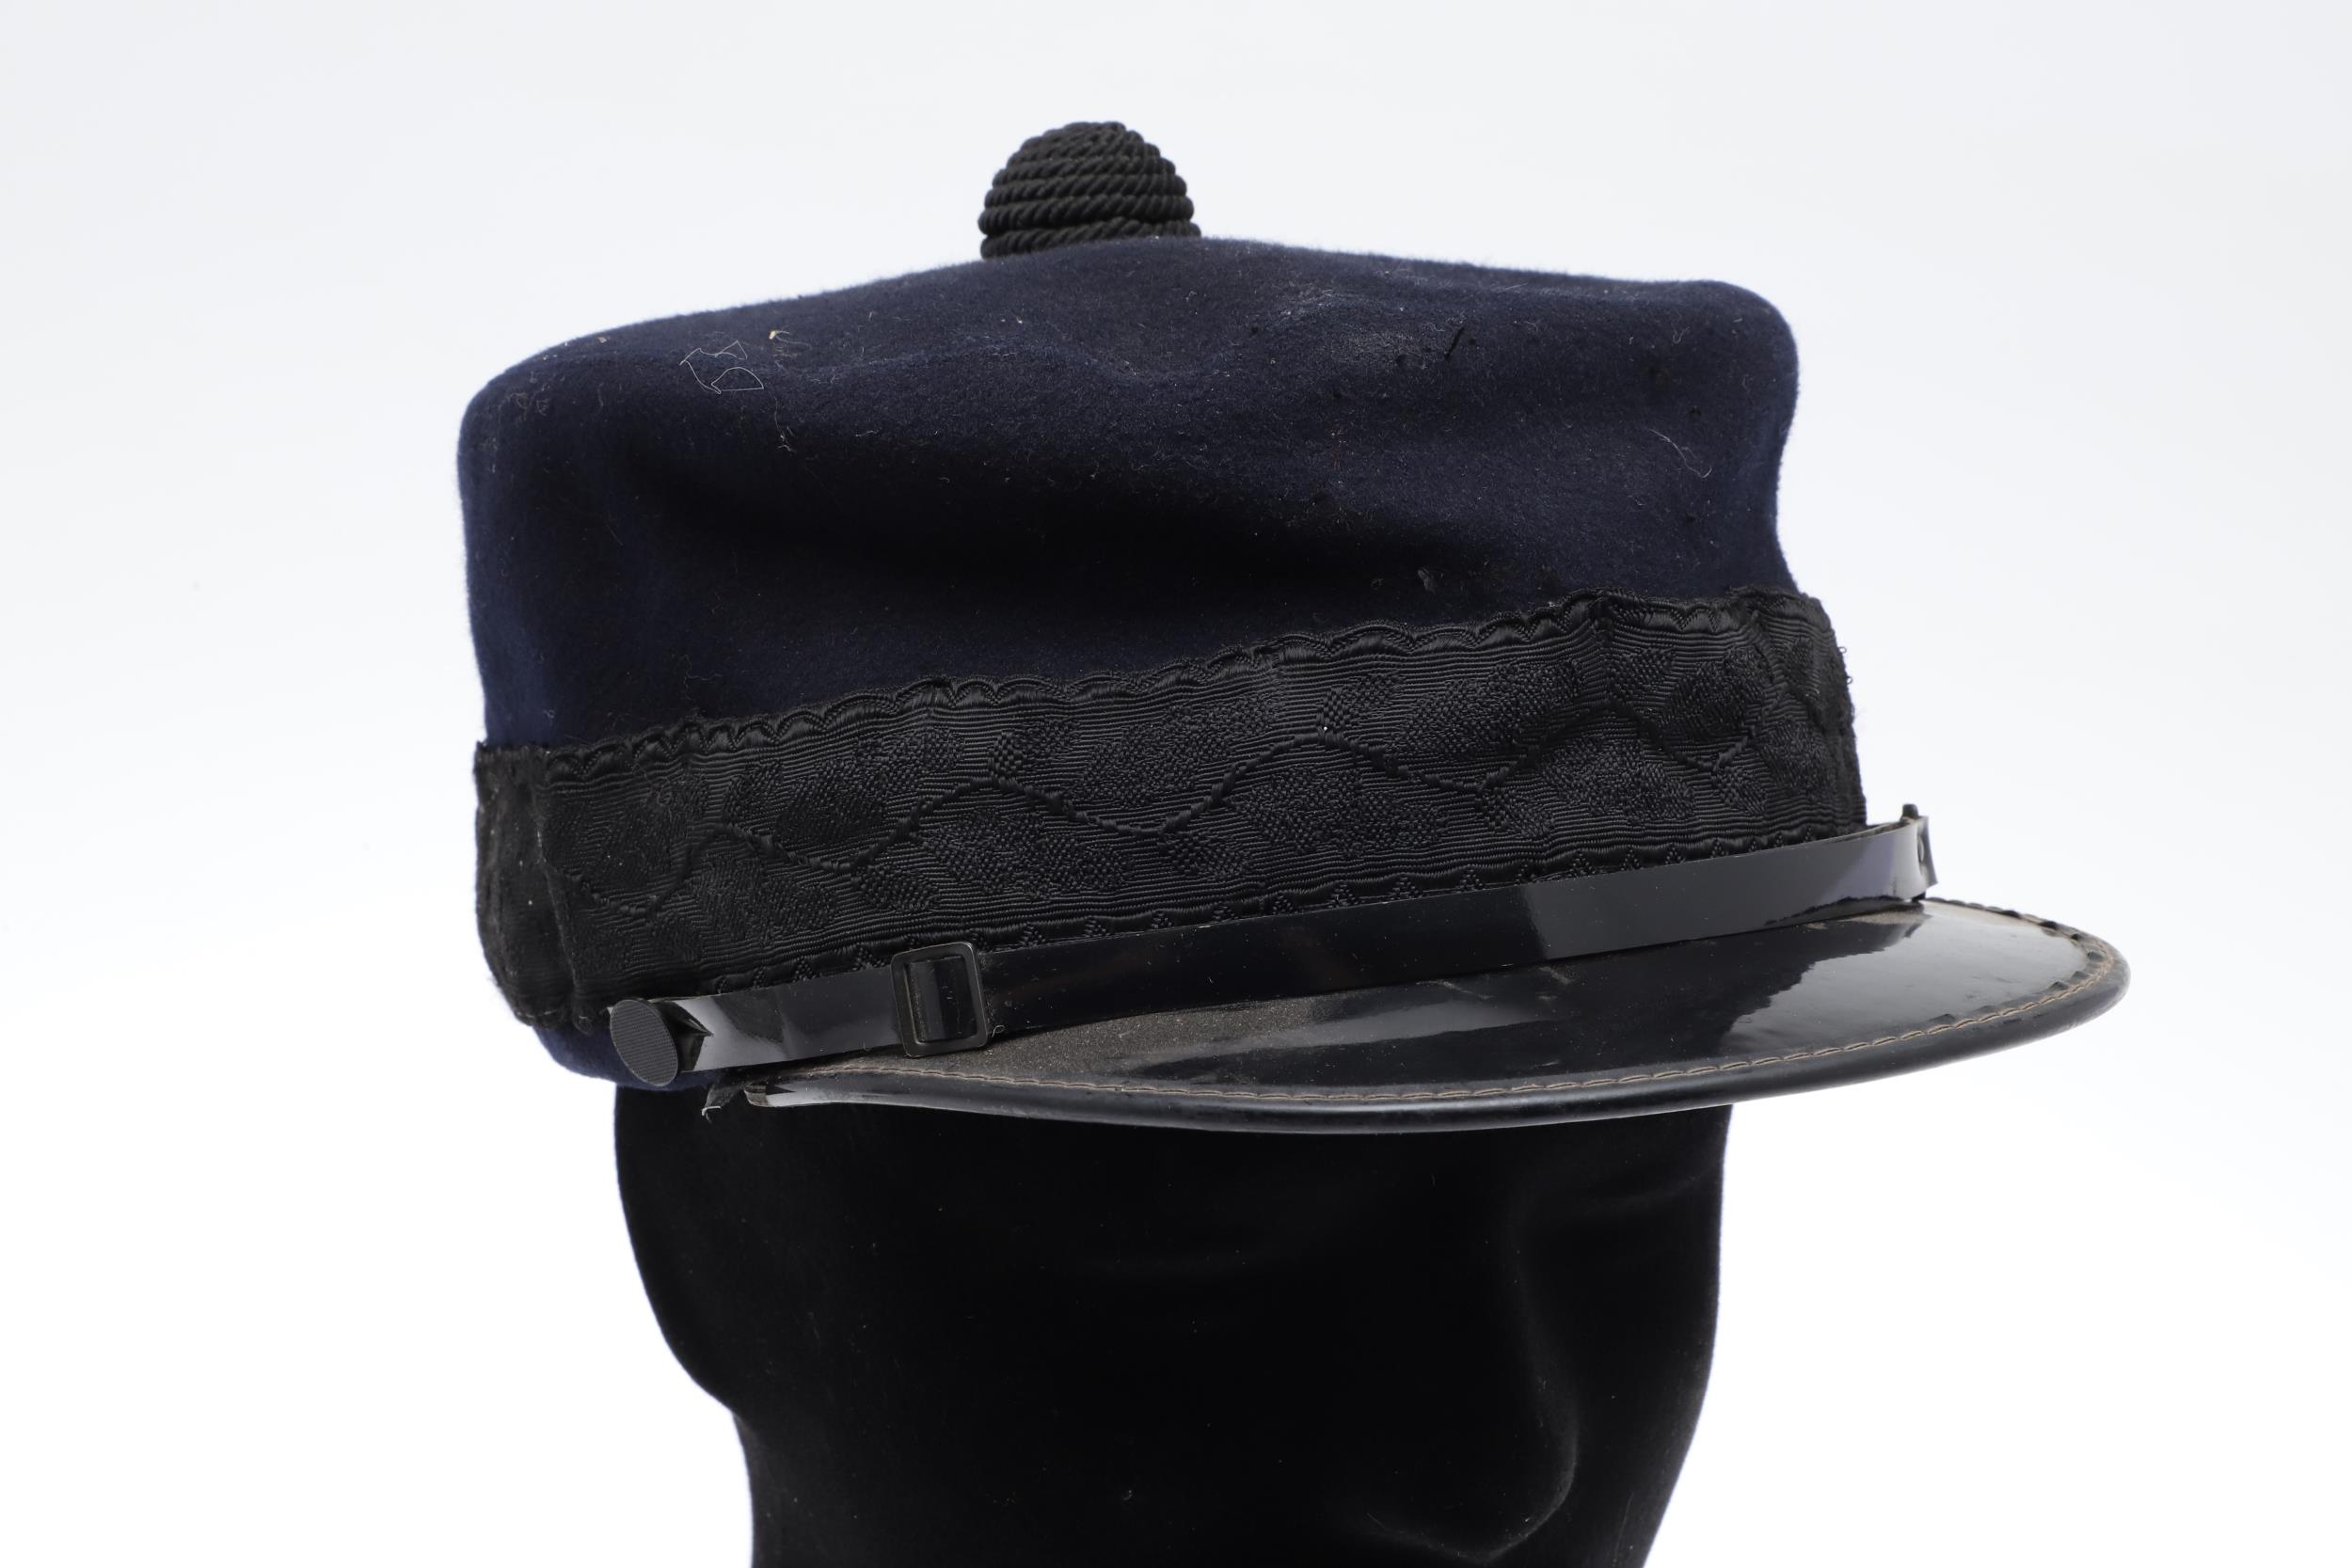 A MILITARY STYLE FORAGE CAP, WHISTLE AND OTHER ITEMS. - Image 7 of 15